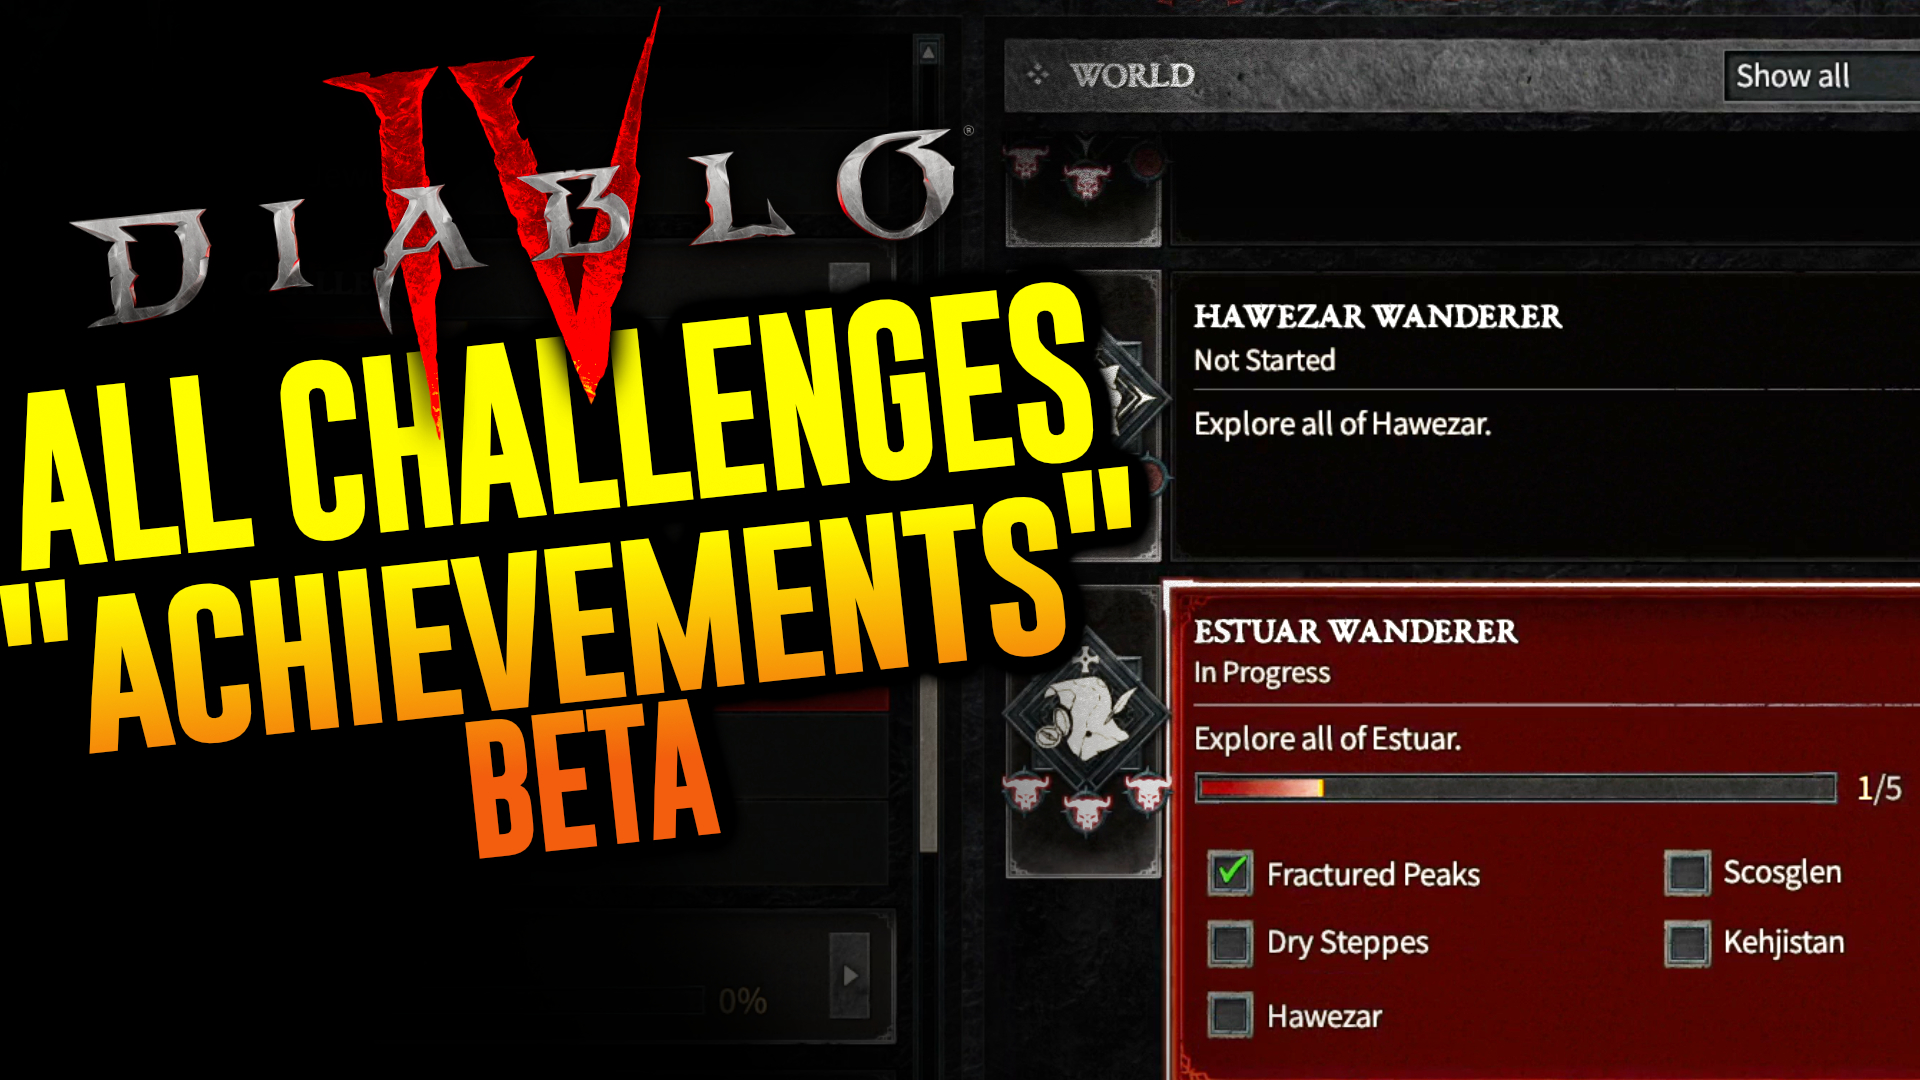 Diablo 4 Early Access Beta Challenges video